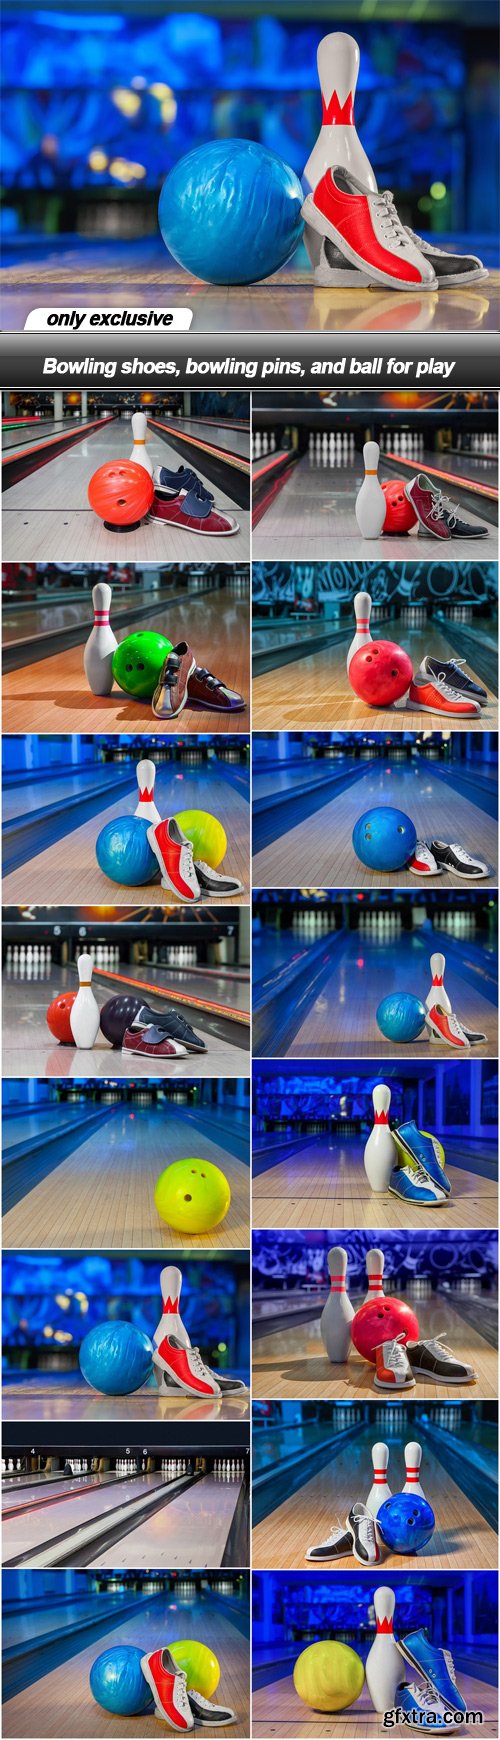 Bowling shoes, bowling pins, and ball for play - 16 UHQ JPEG